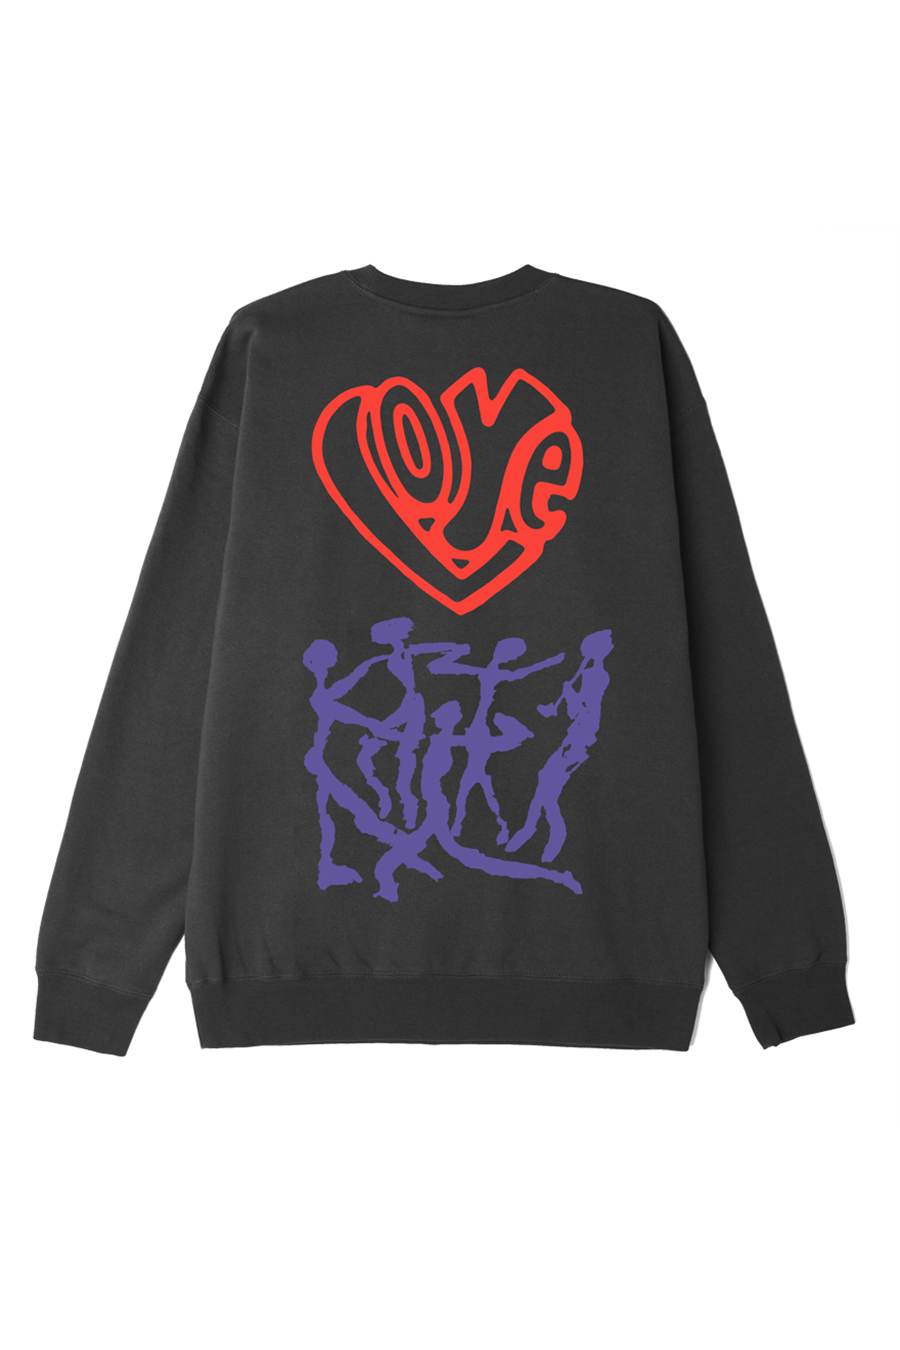 Free Your Feelings Crewneck | Black - Main Image Number 2 of 2